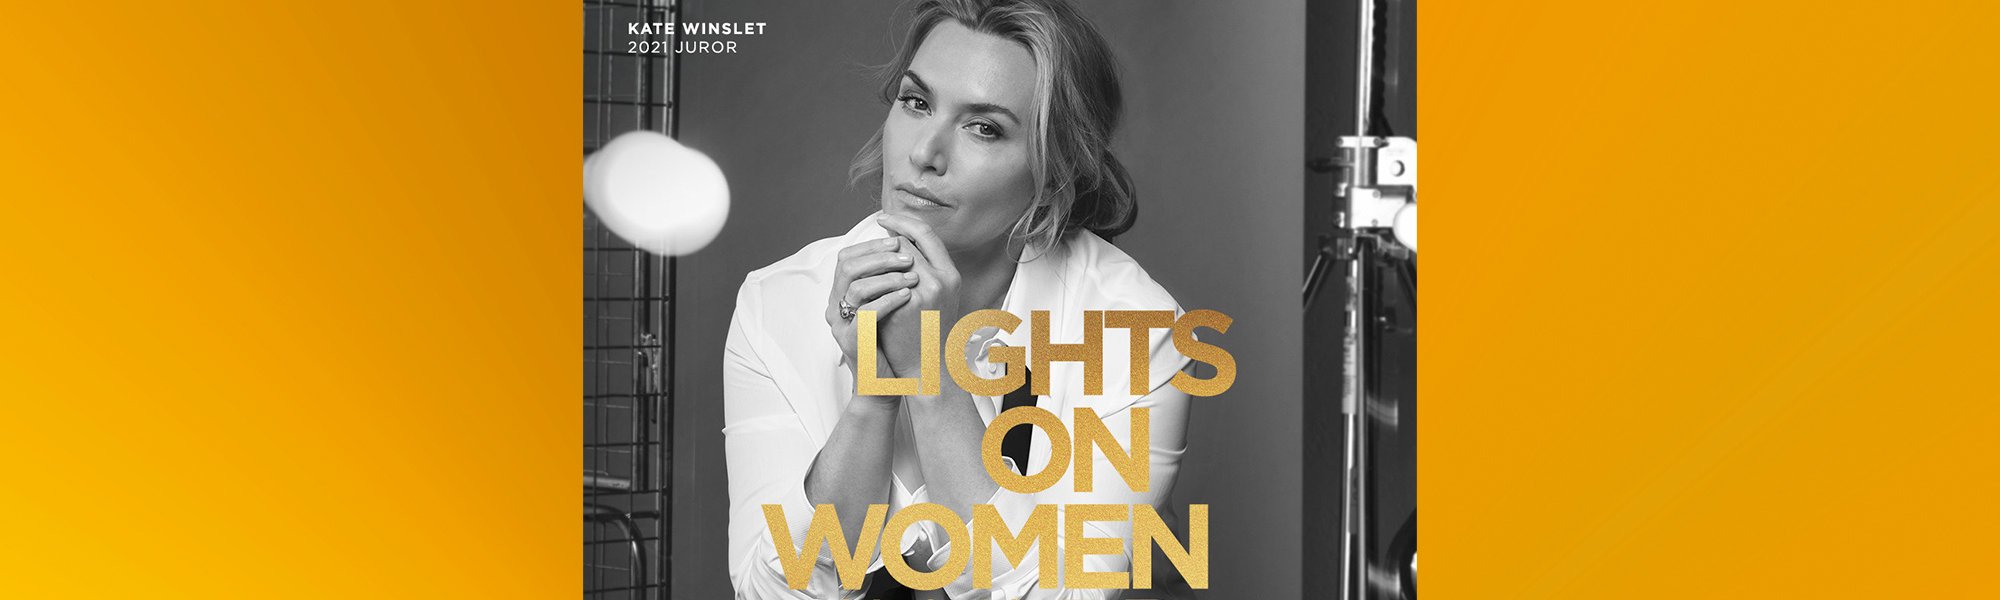 Cannes Lights On Women Kate Winslet CMS Bmag